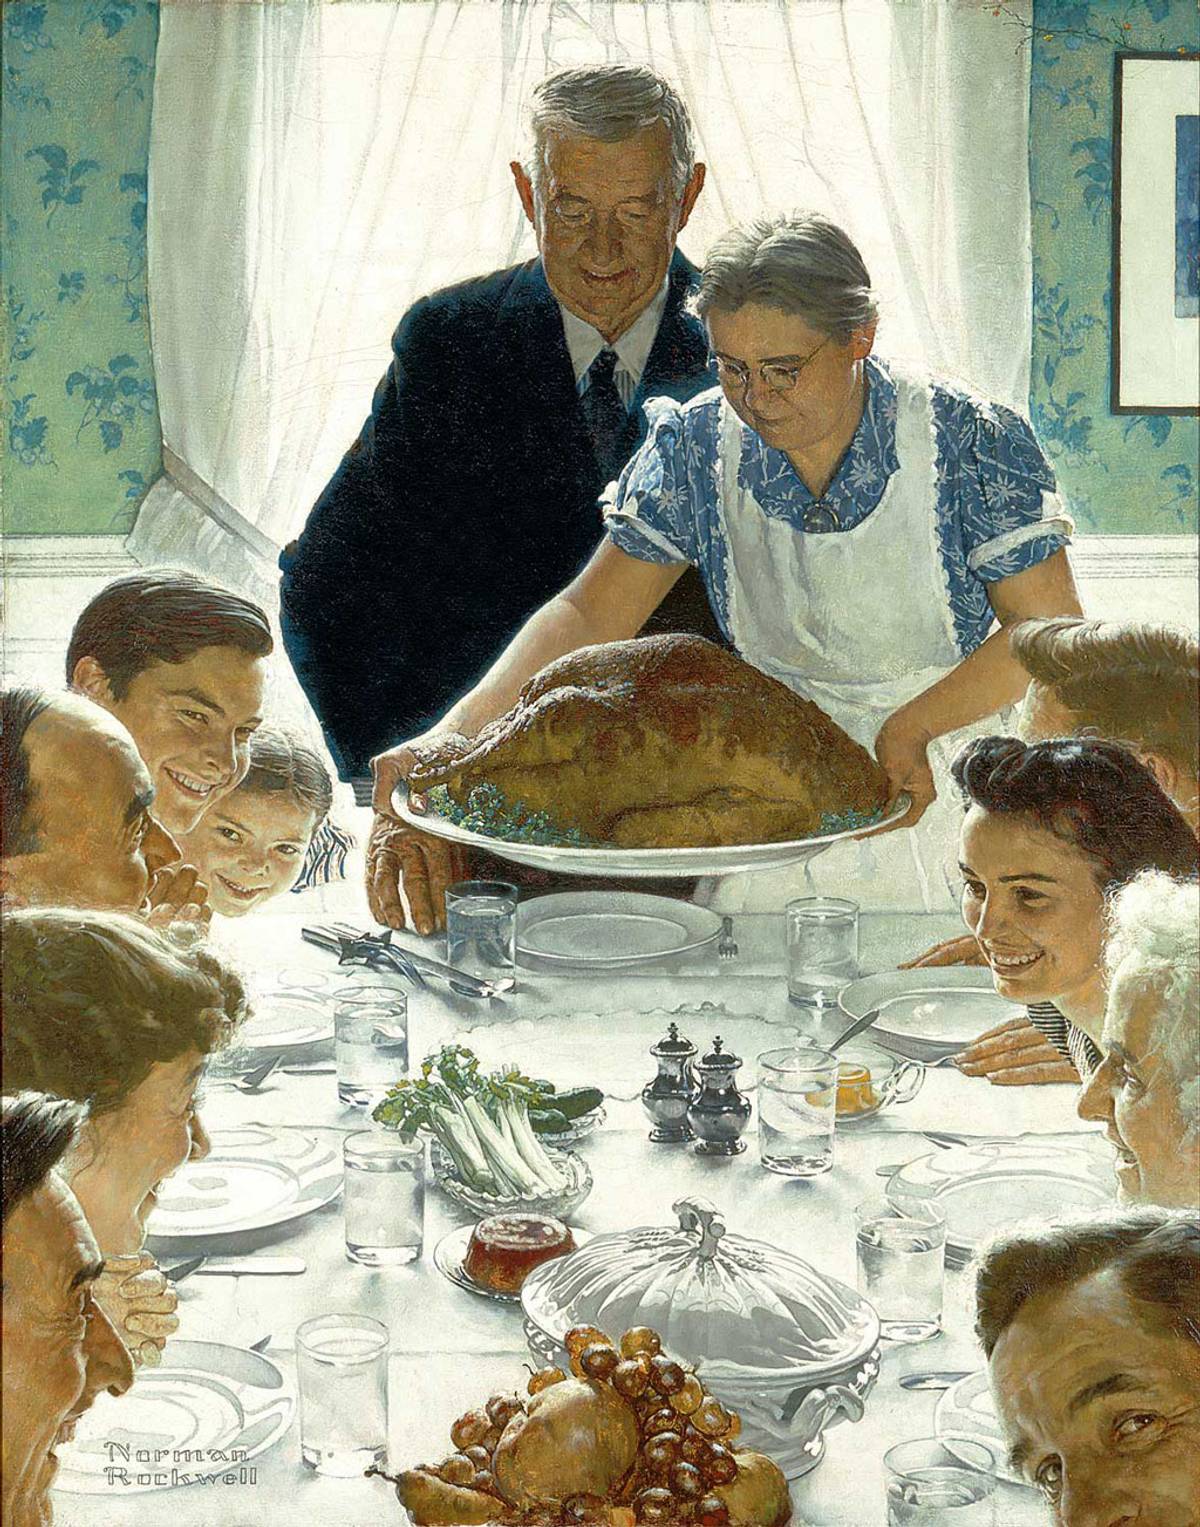 Norman Rockwell, ‘Freedom from Want,’ 1943 (Wikipedia)